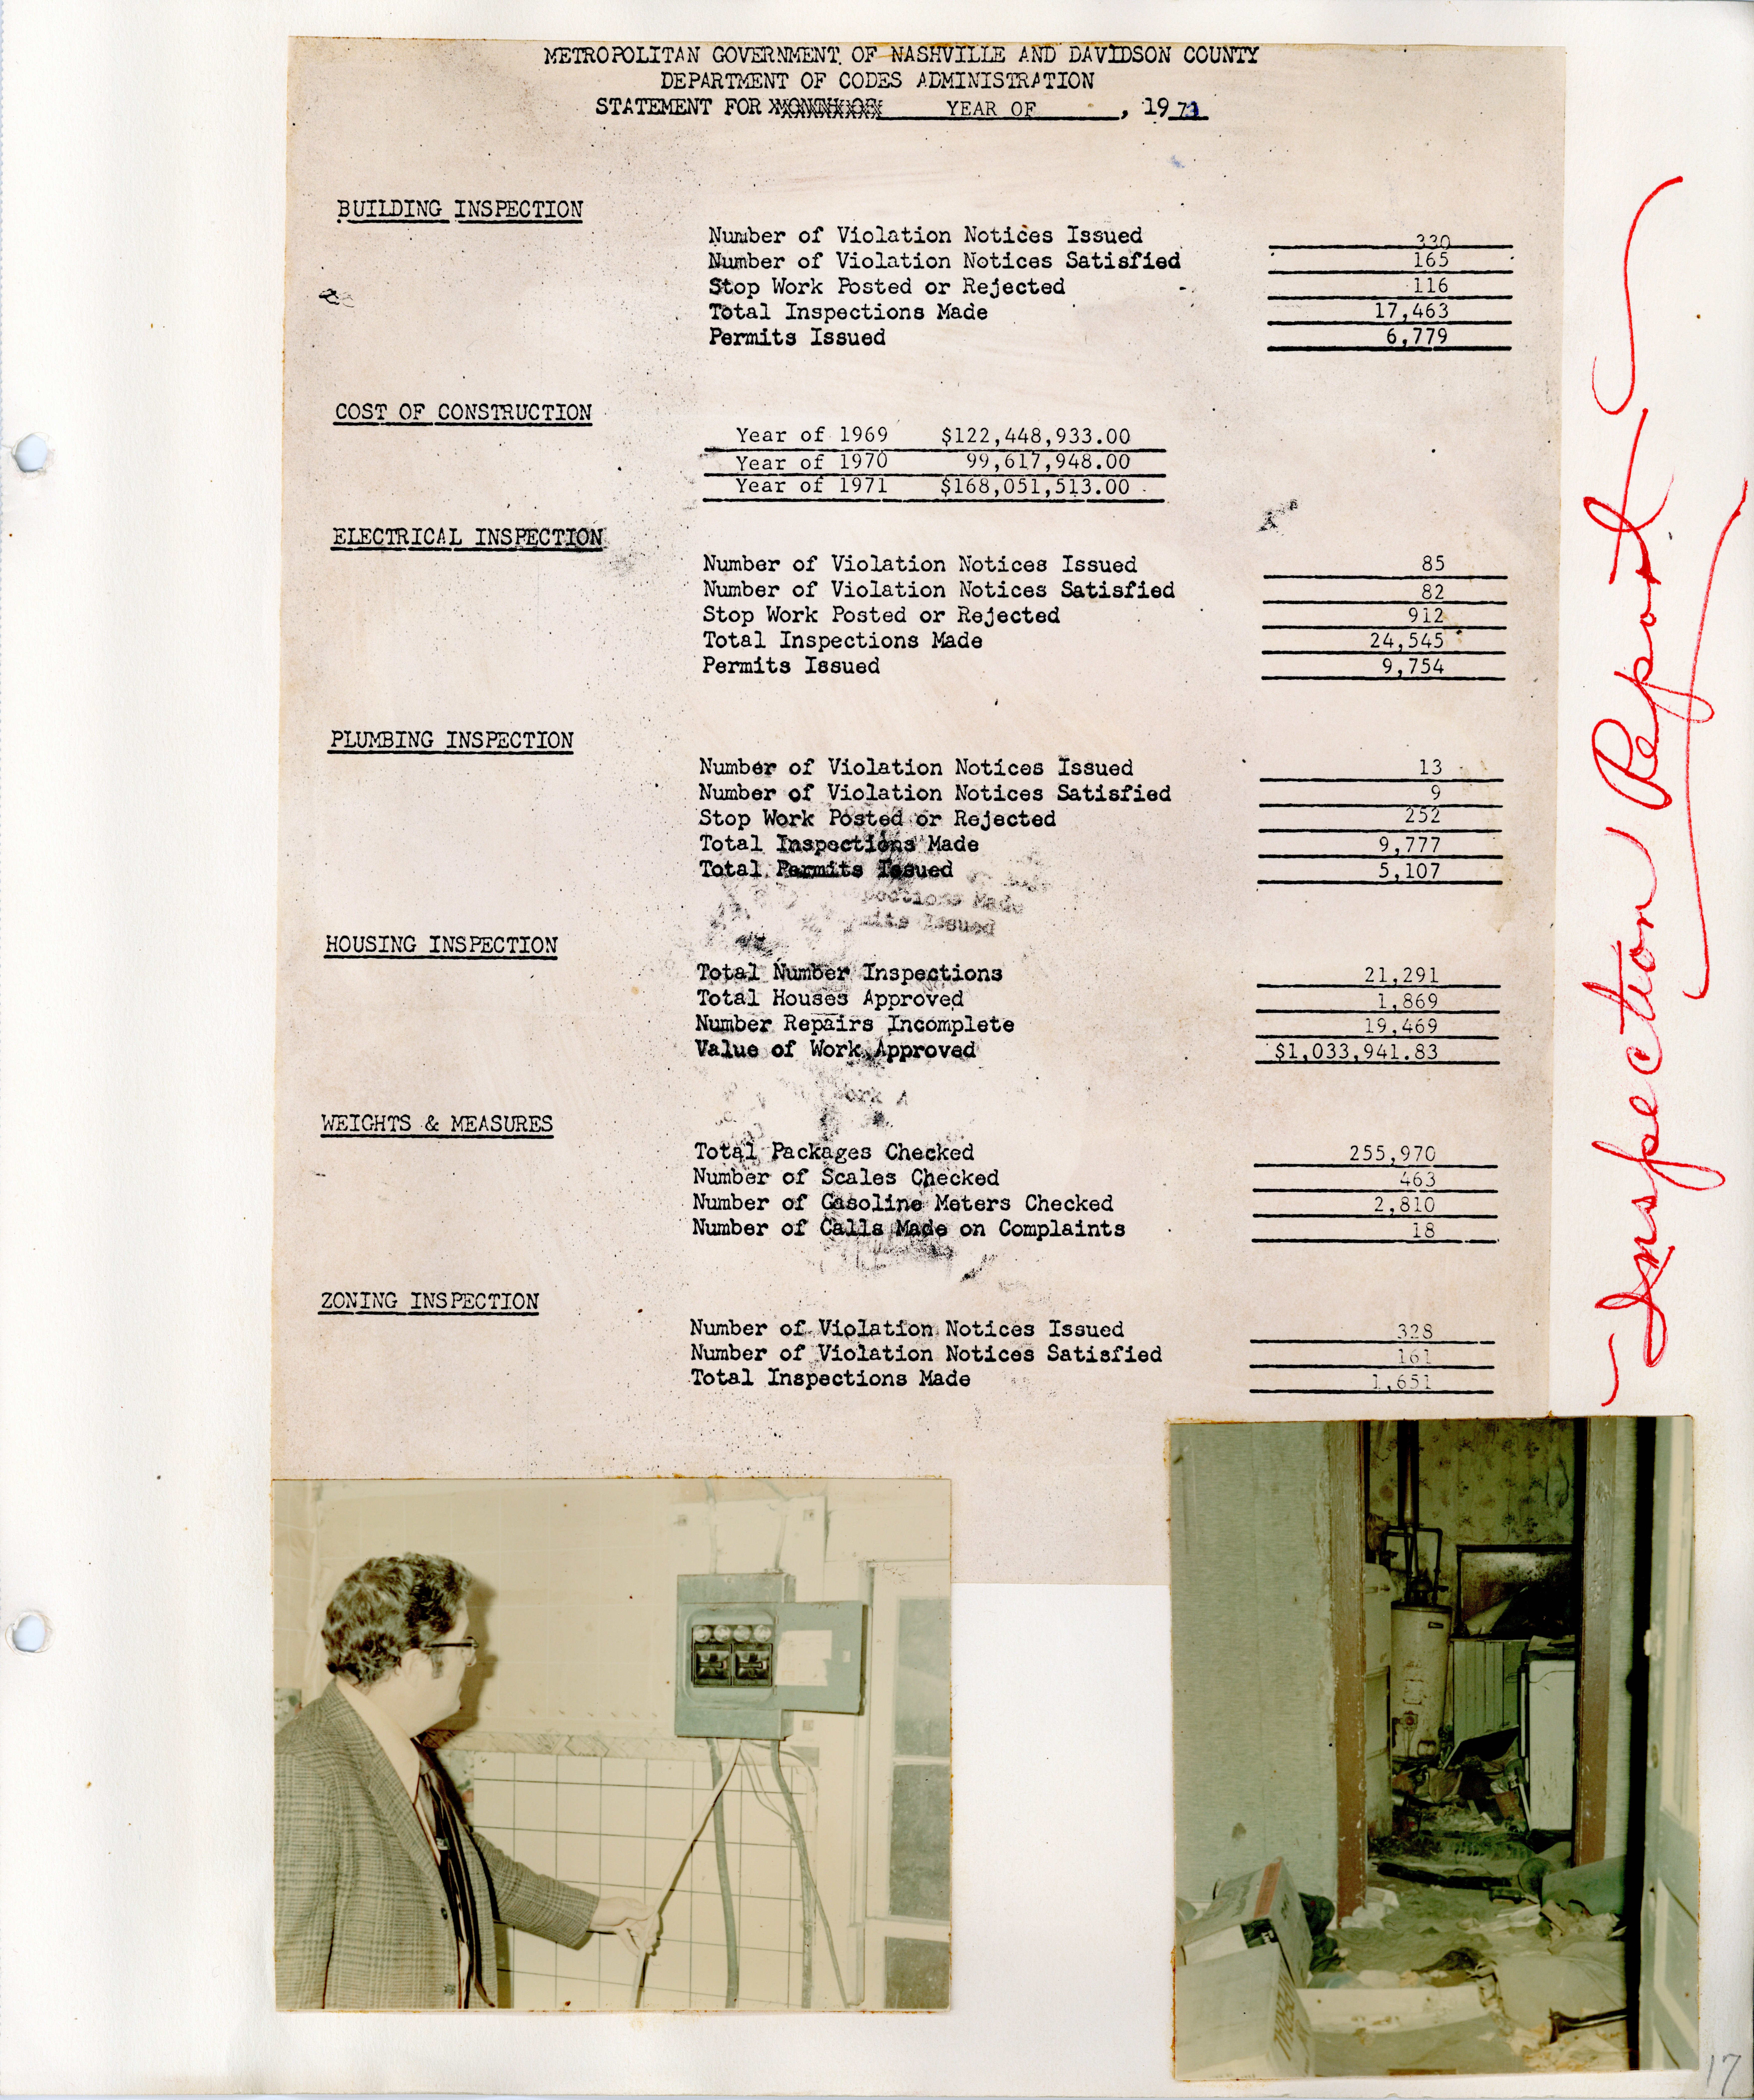 From the 1972 Fire Department scrapbook, inspection statistics for the year.